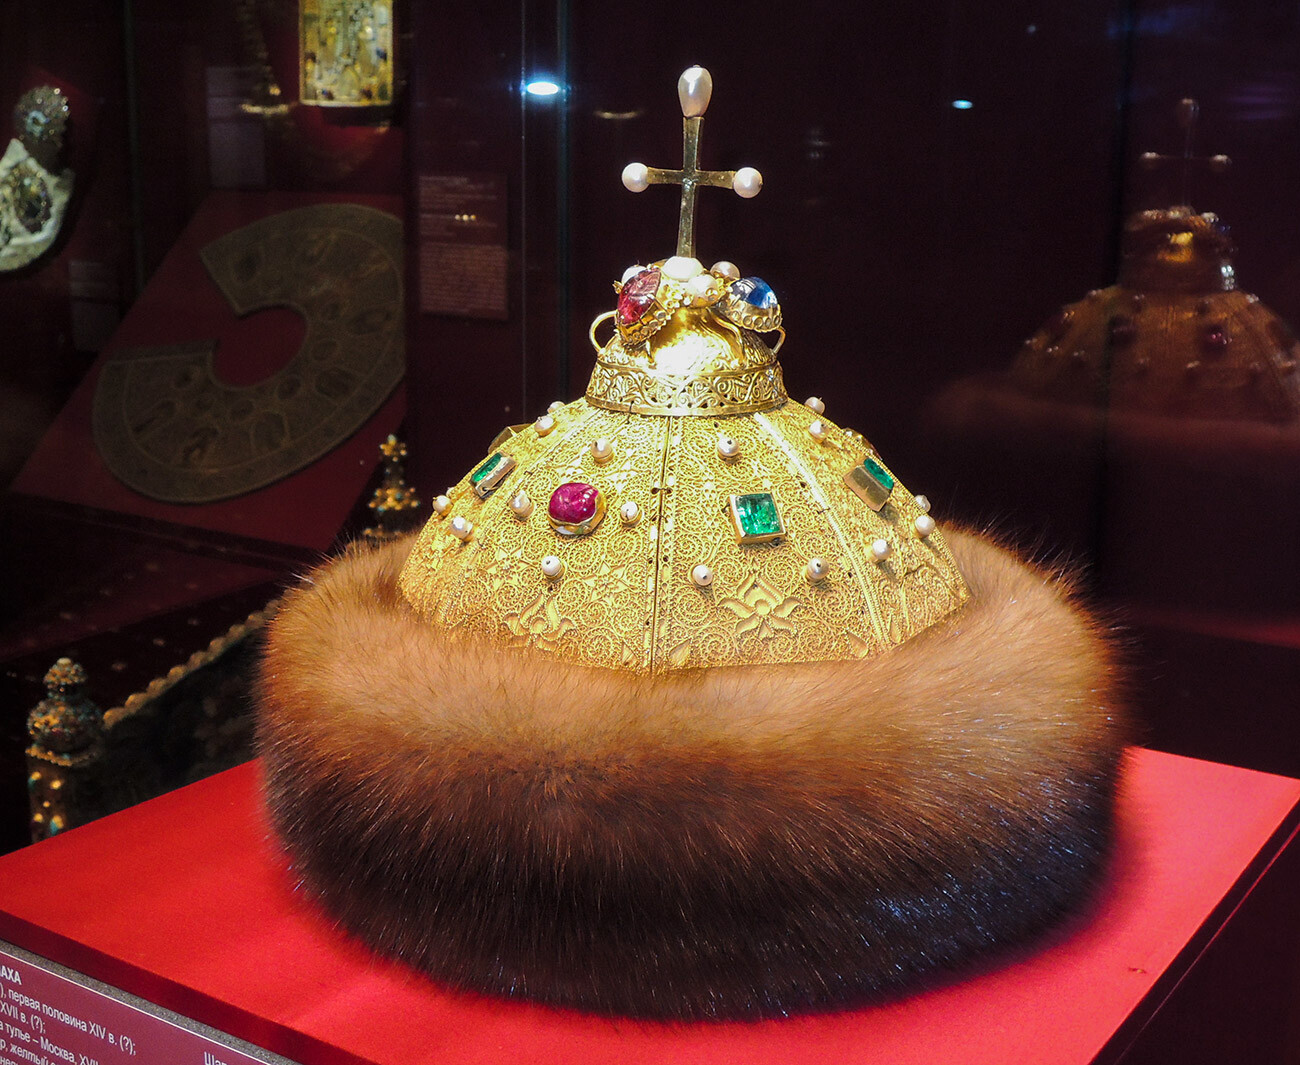 The Monomakh's Cap, the oldest crown of the Russian tsars, in the Kremlin Armory